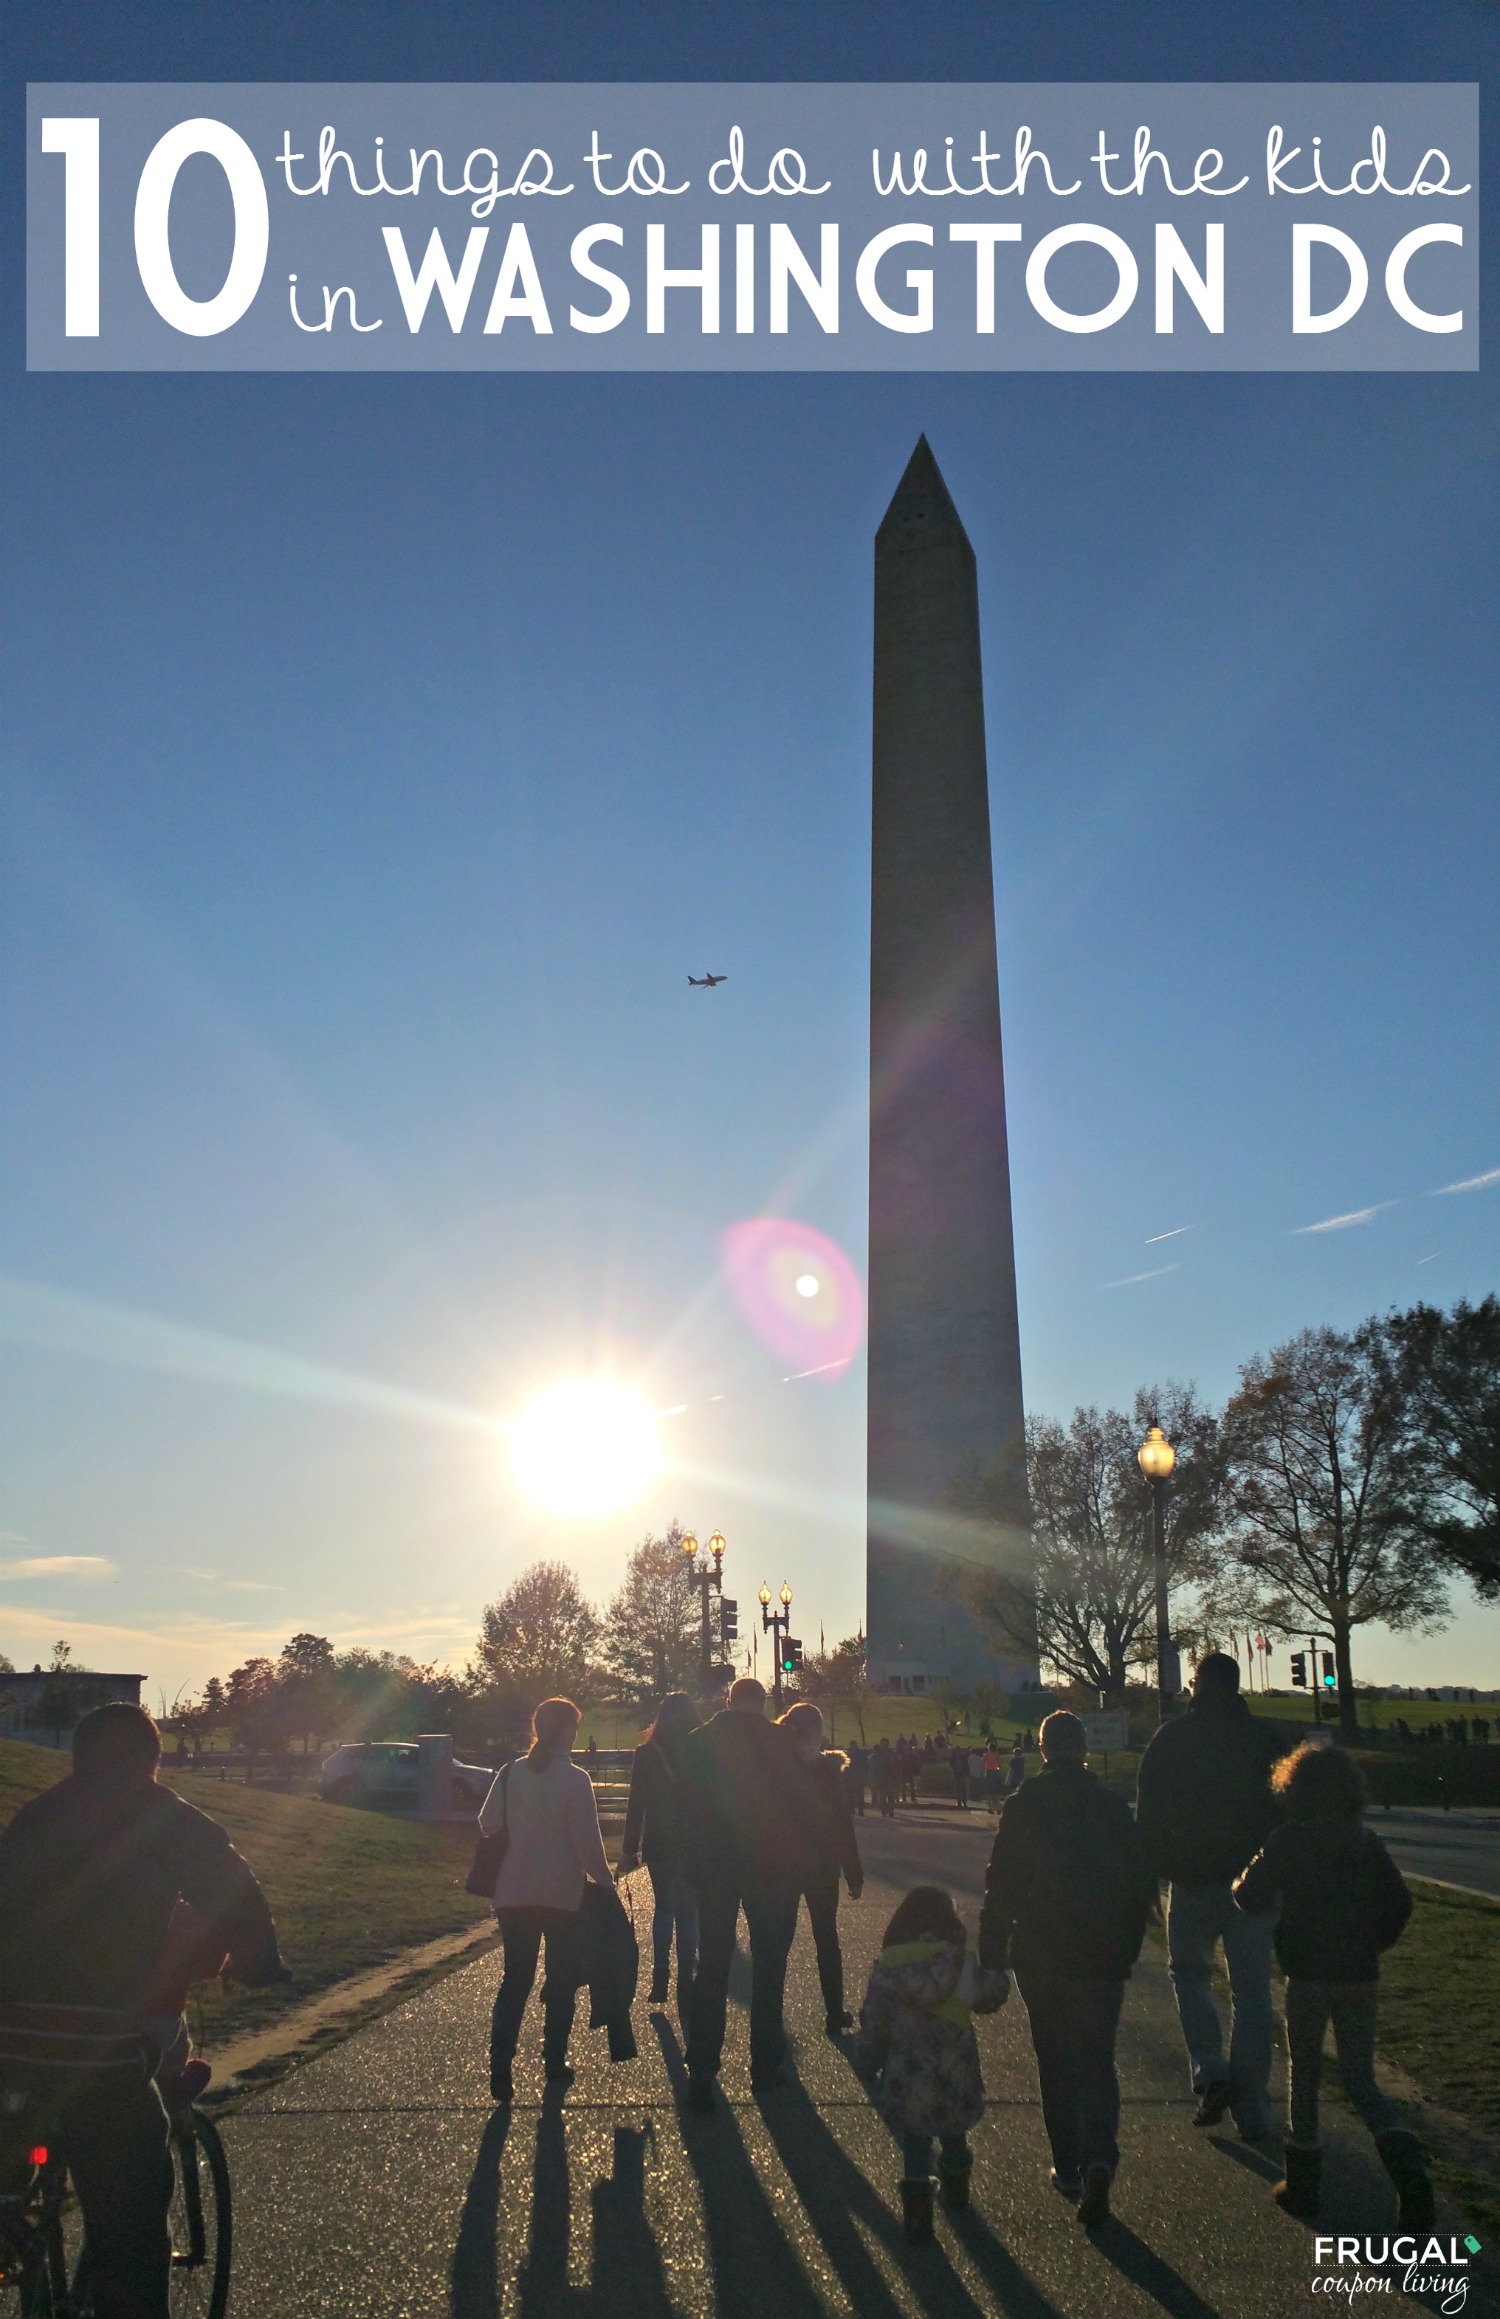 10-things-to-do-with-the-kids-in-washington-dc-frugal-coupon-living